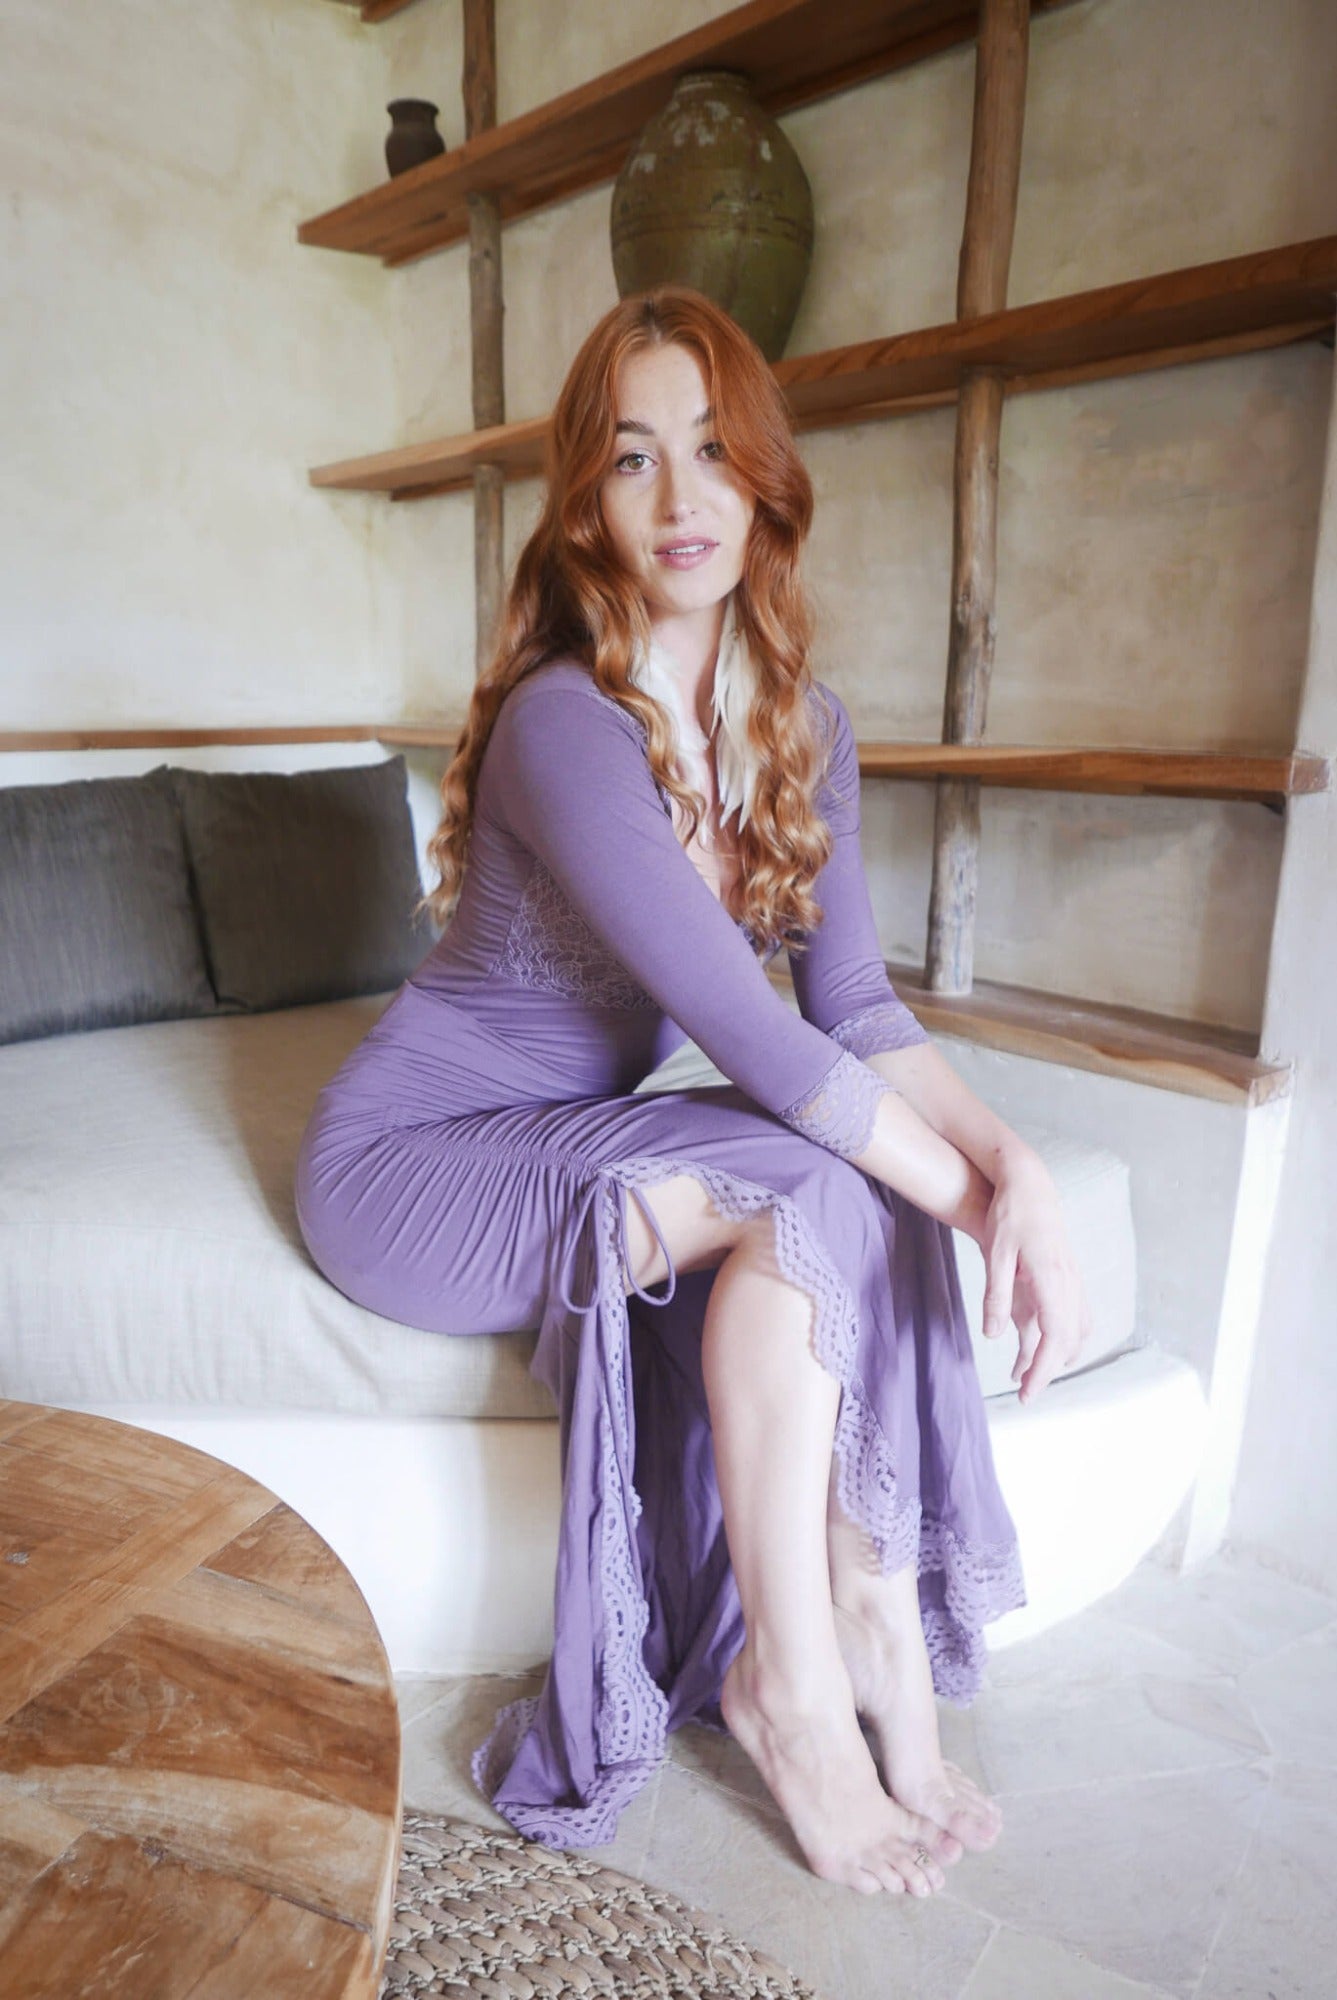 Hip long shirt with 3/4 sleeve length, medieval neck shape, lace details on sleeves and bust in color eggplant.